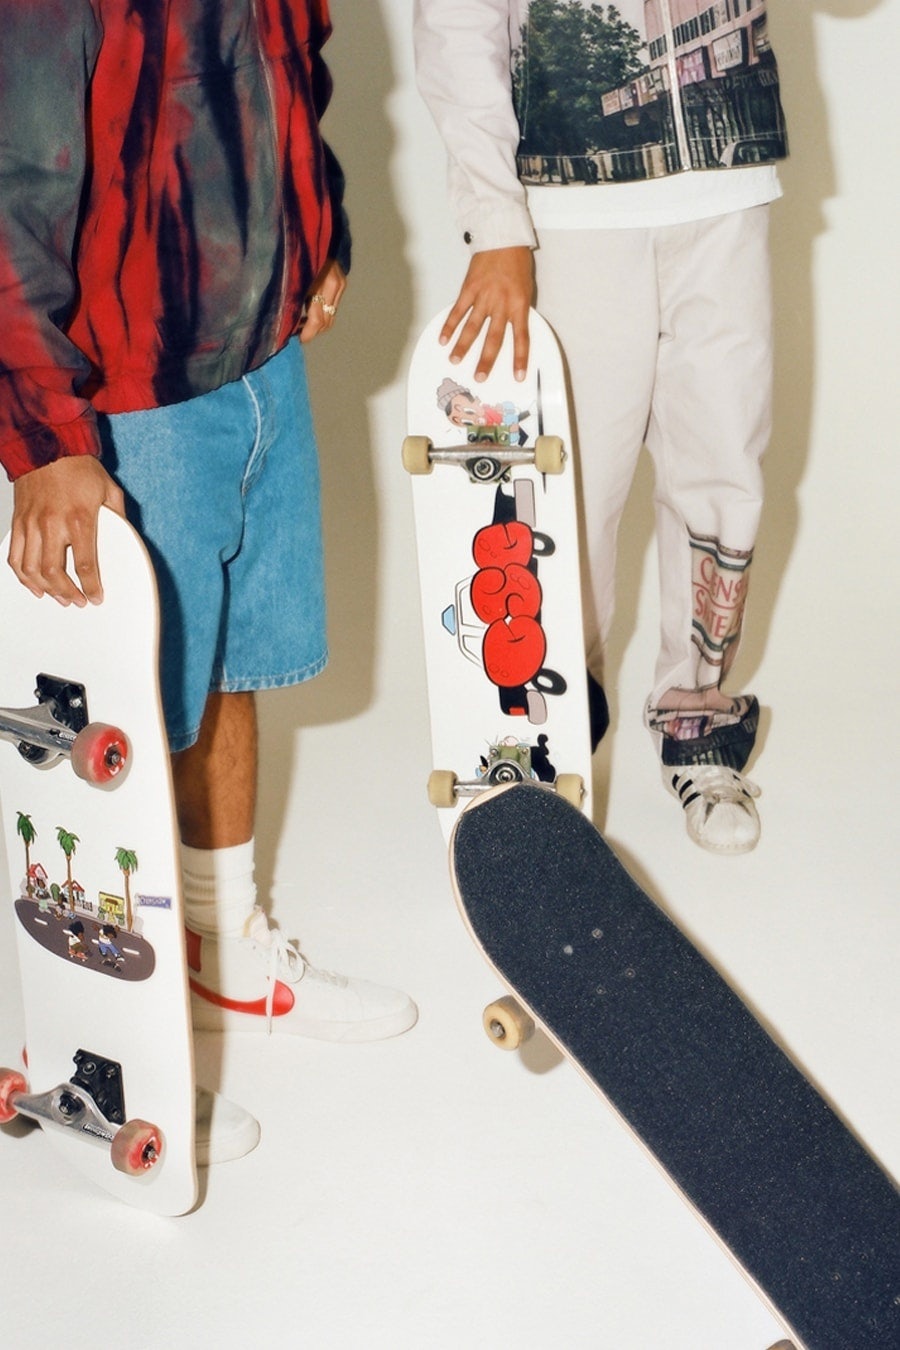 Skateboards feature in the Browns x Crenshaw Skate Club collaboration which debuted as part of LFW Men's. Photo: Browns